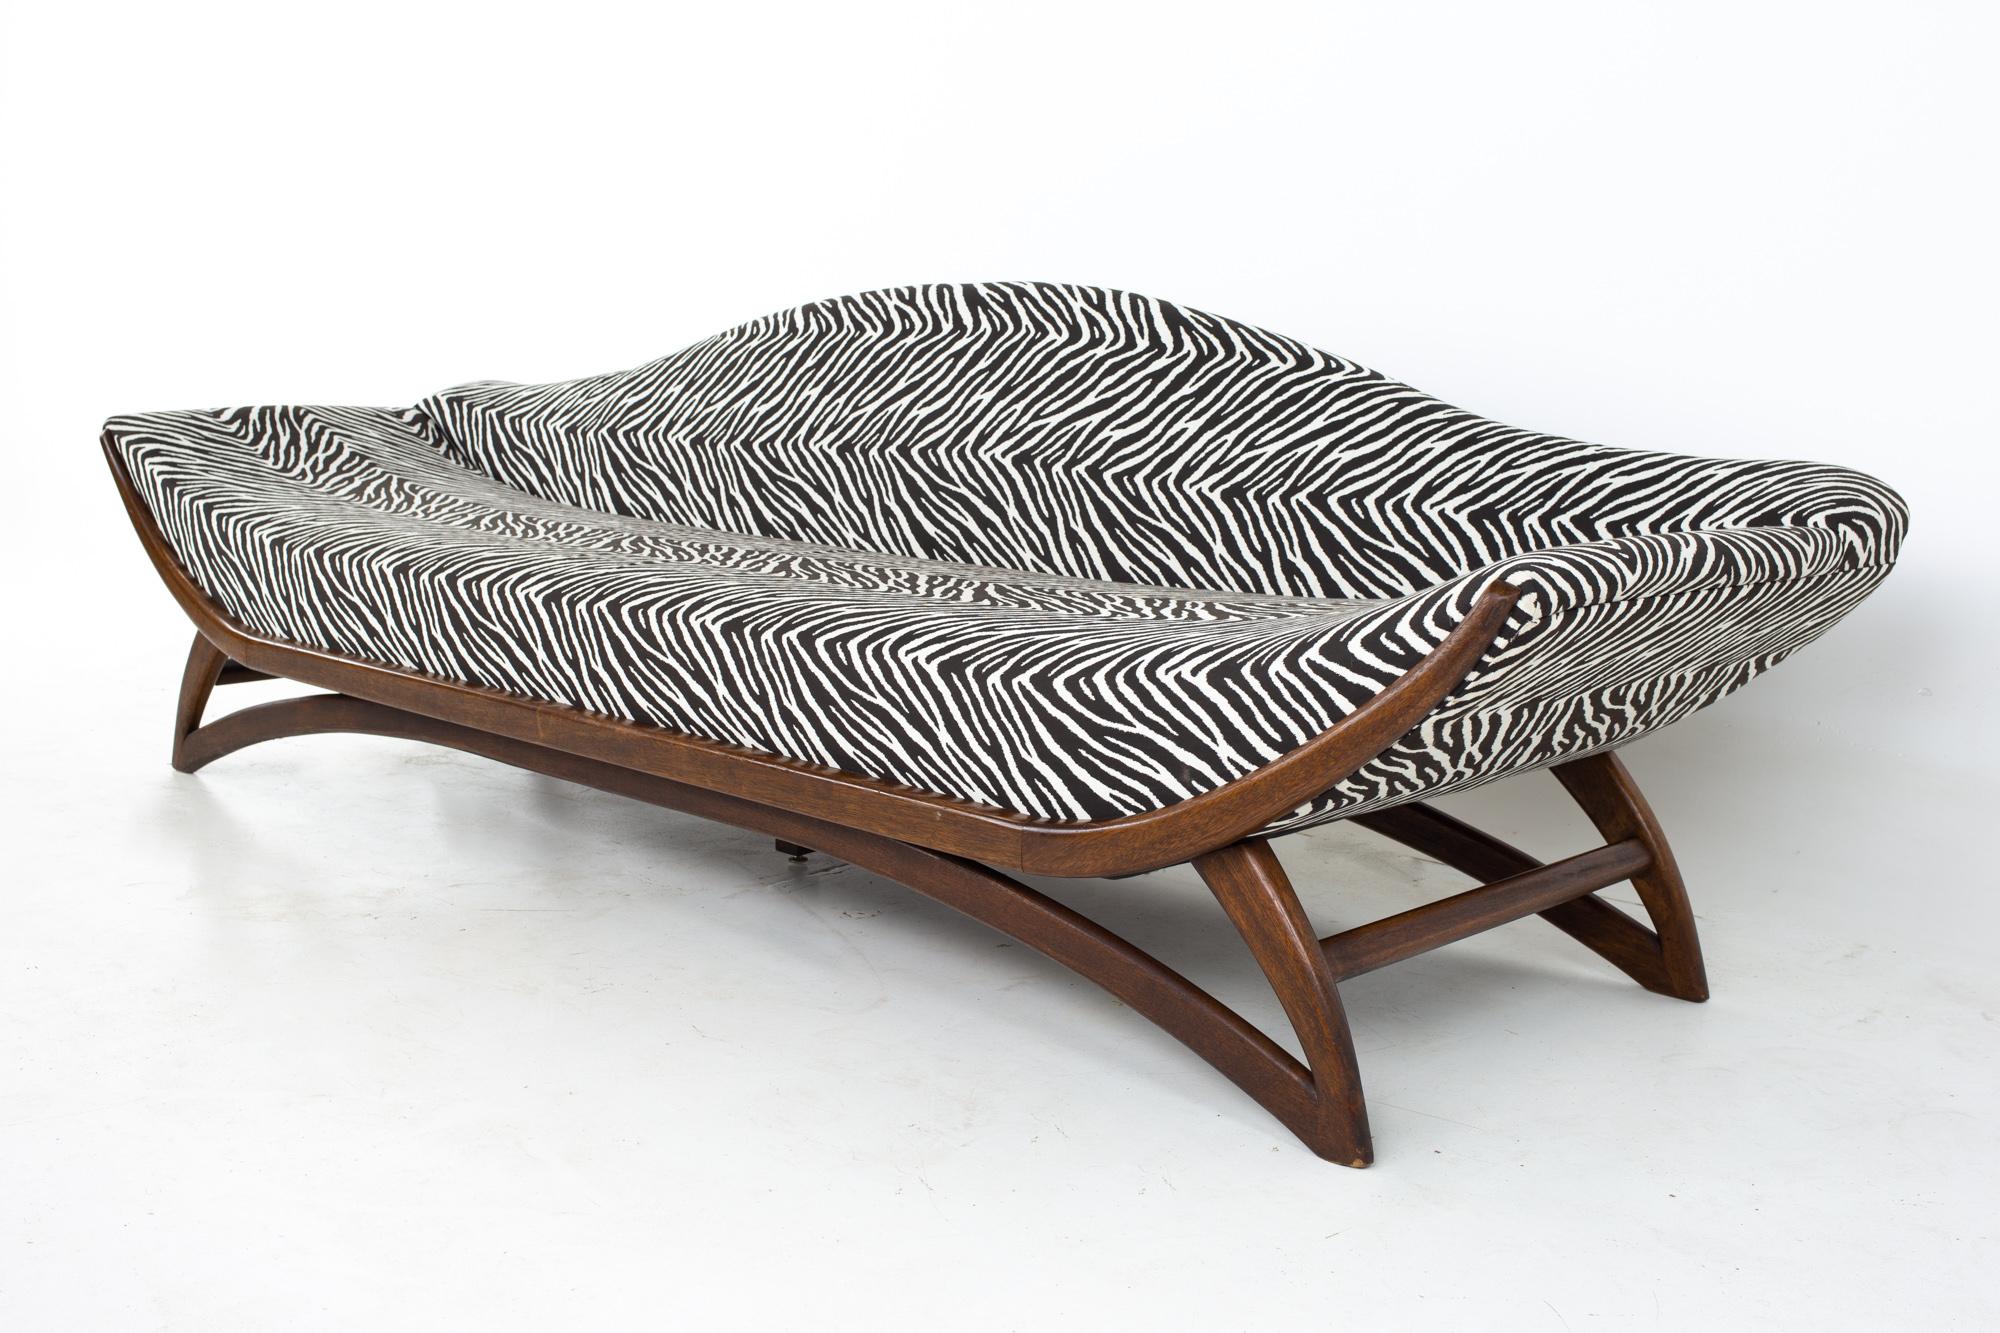 Adrian Pearsall style Mid Century zebra stripe gondola sofa
Sofa measures: 106.5 wide x 33 deep x 32.5 high, with a seat height of 17.5 inches and an arm height of 23.5 inches

All pieces of furniture can be had in what we call restored vintage